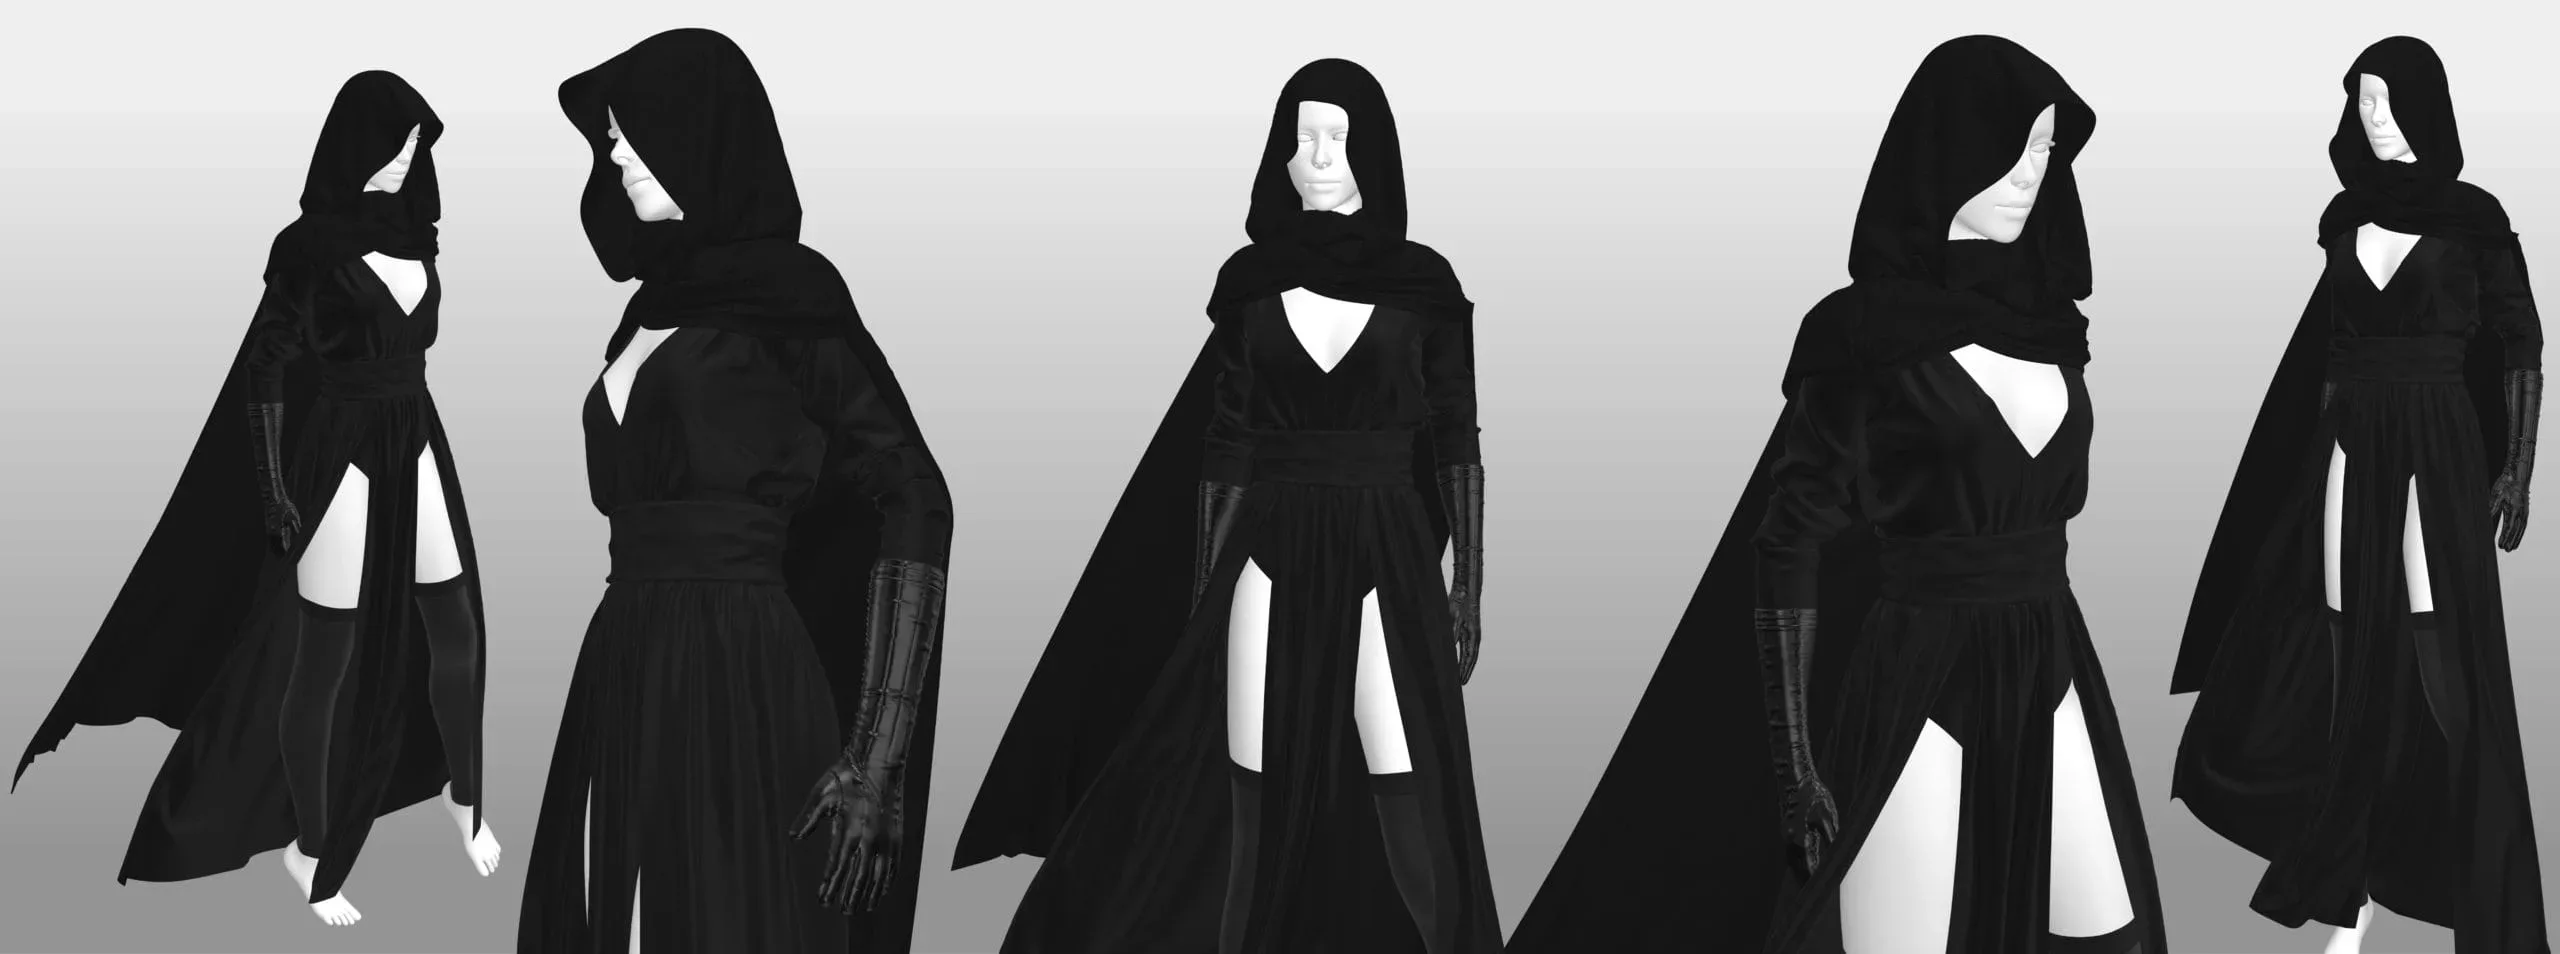 Sith Outfit Vol.01 - Star Wars Collection